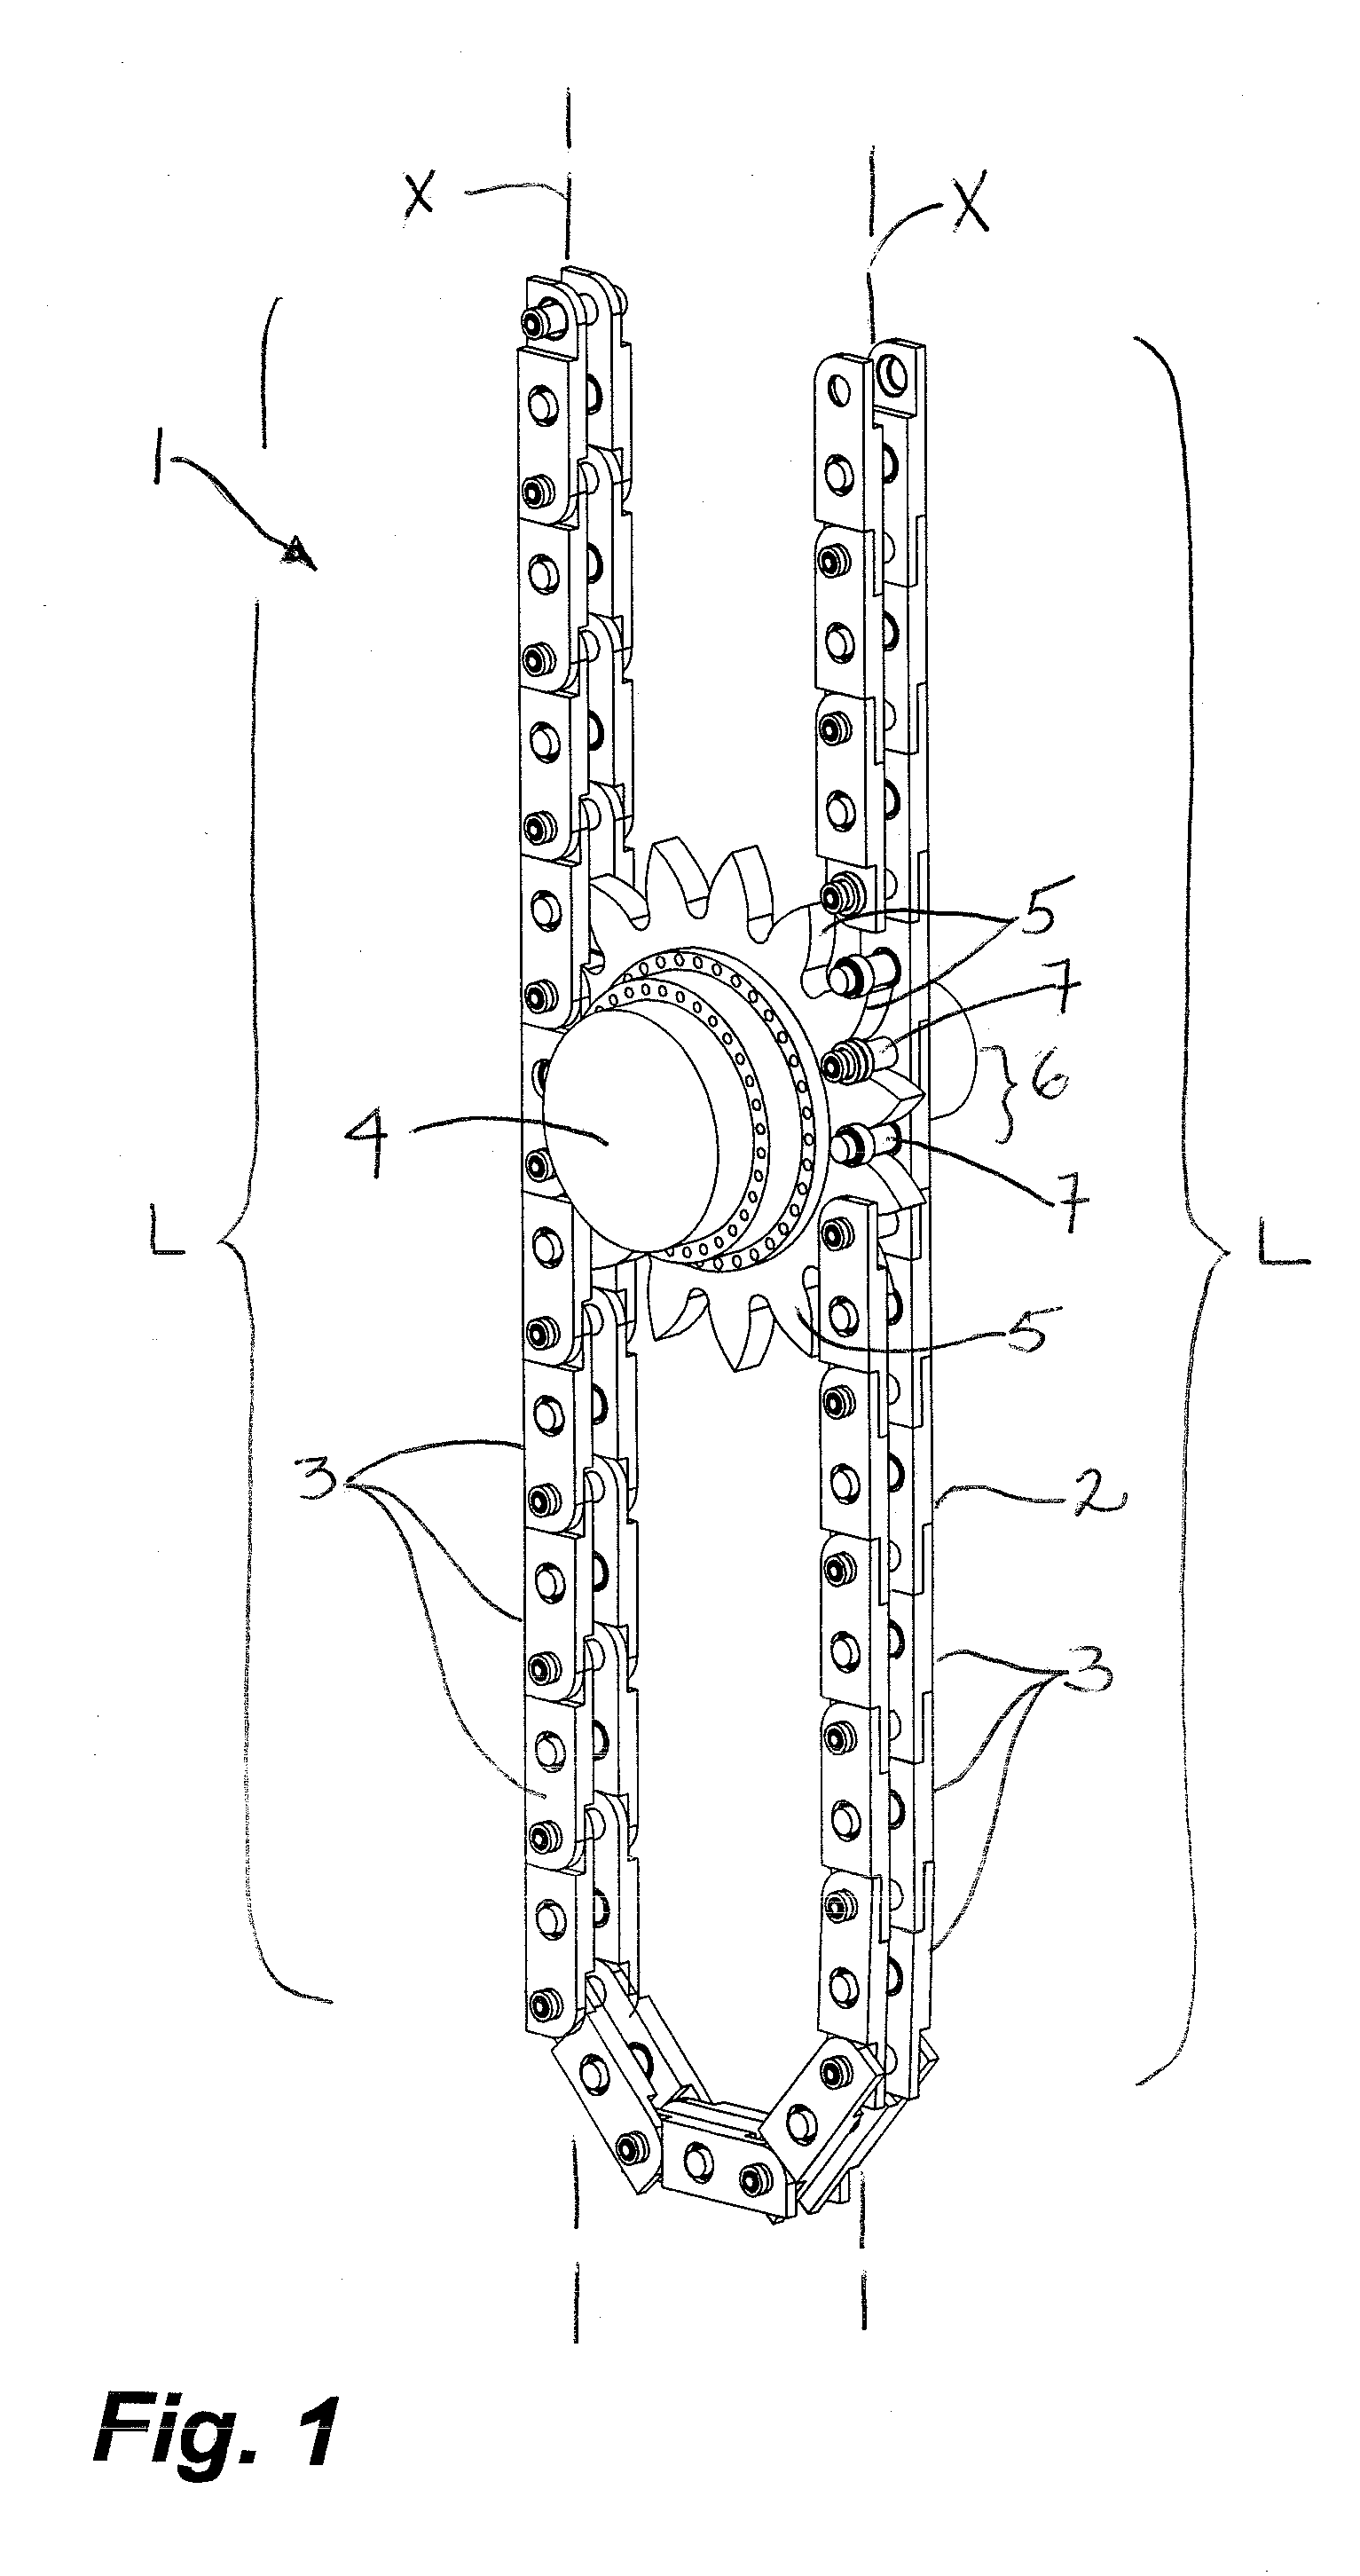 Roller chain and sprocket system